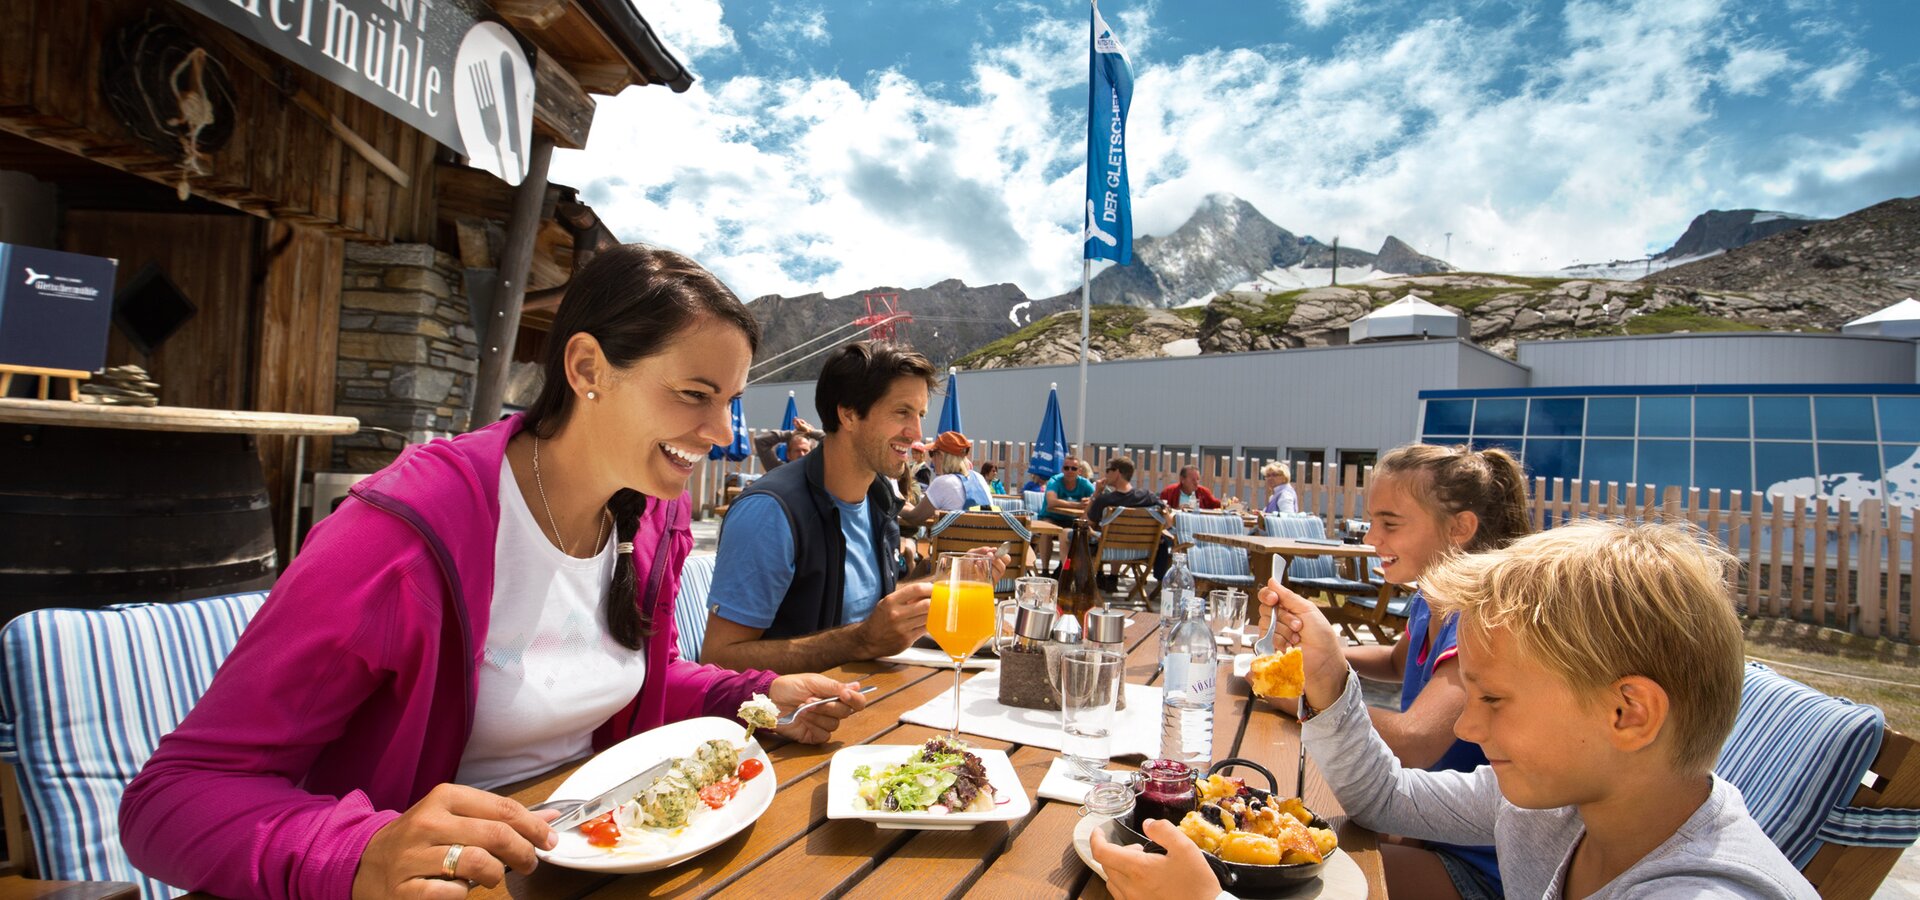 Enjoy typical Austrian cuisine at the cosy Gletschermühle restaurant on the sun plateau at the Alpincenter in 2.450 metres above sea level | © Kitzsteinhorn